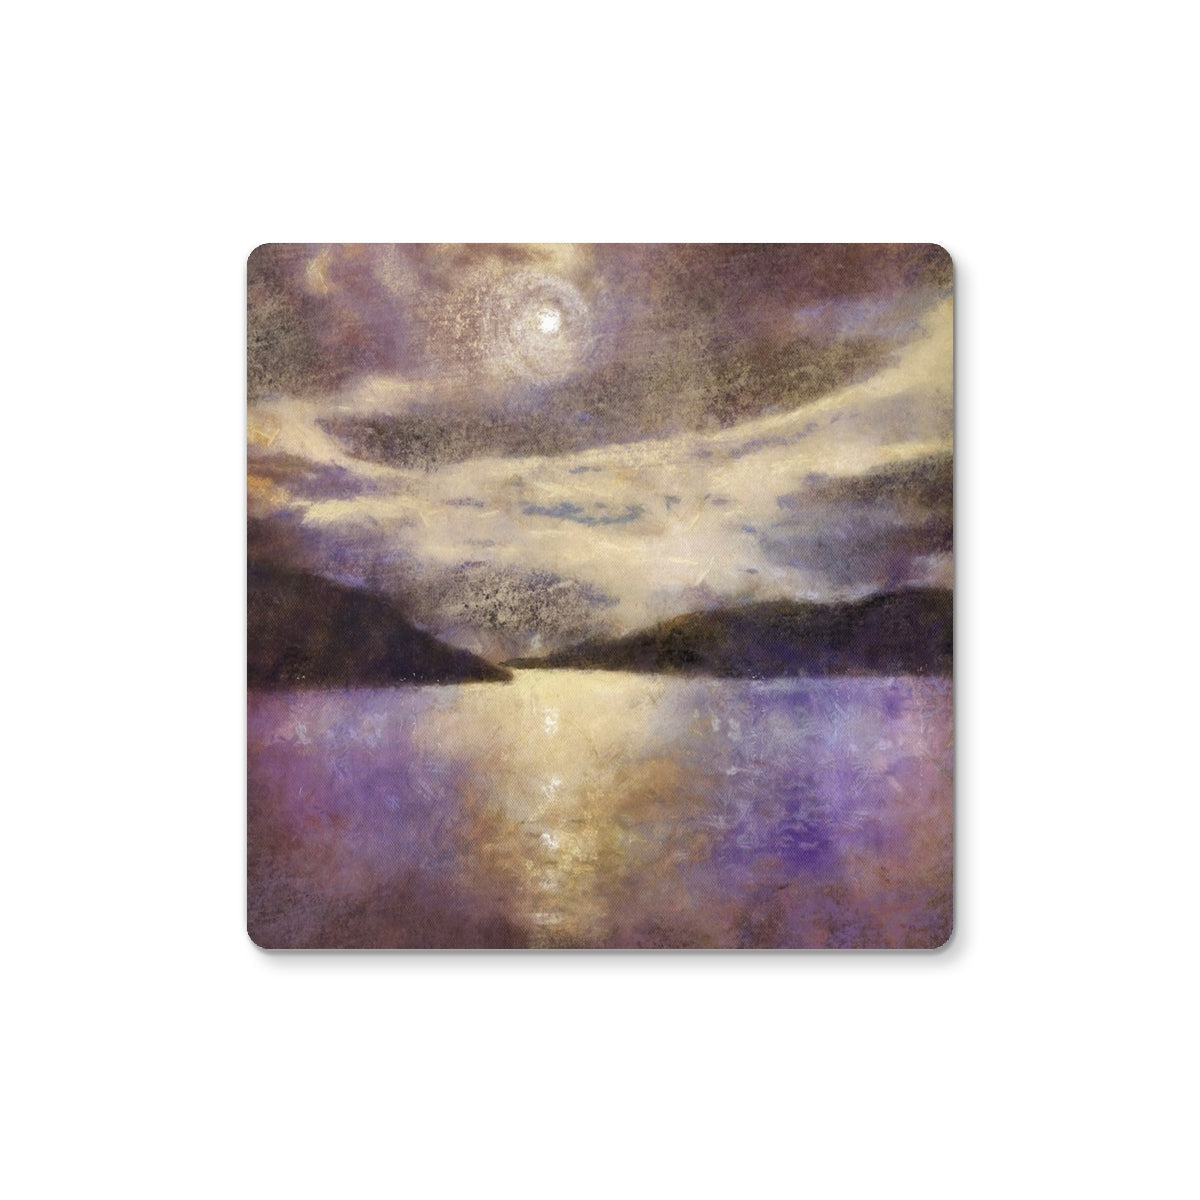 Moonlight Meets Lewis & Harris Art Gifts Coaster-Coasters-Hebridean Islands Art Gallery-2 Coasters-Paintings, Prints, Homeware, Art Gifts From Scotland By Scottish Artist Kevin Hunter